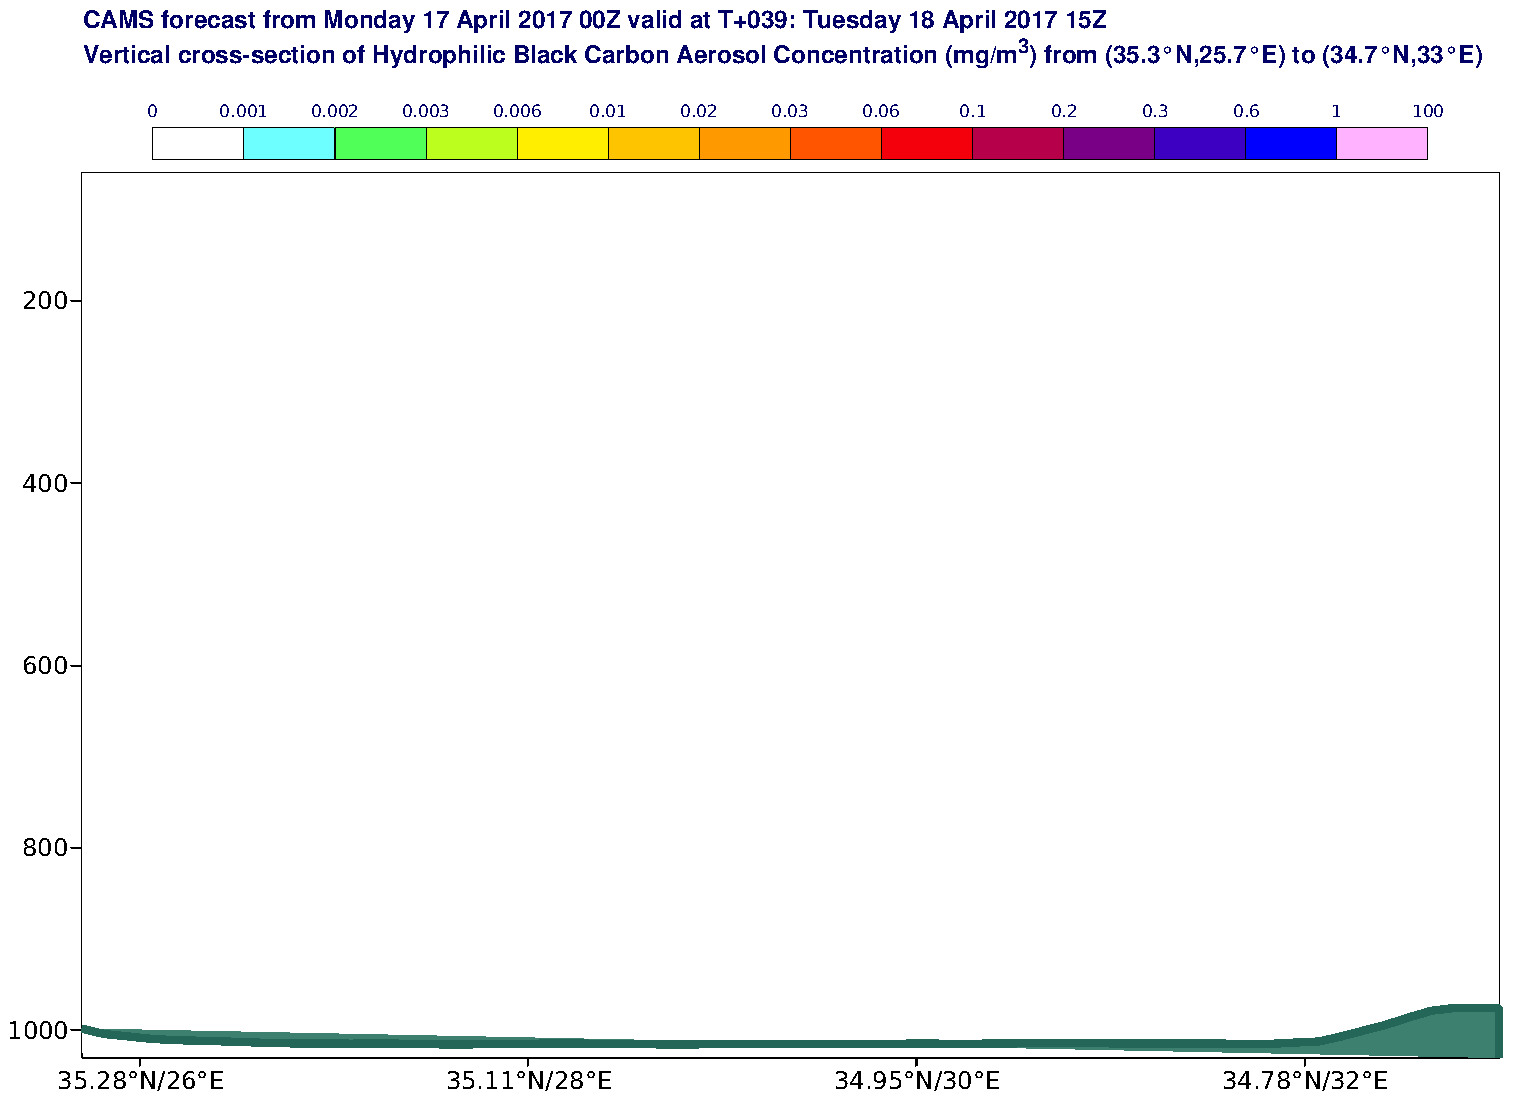 Vertical cross-section of Hydrophilic Black Carbon Aerosol Concentration (mg/m3) valid at T39 - 2017-04-18 15:00